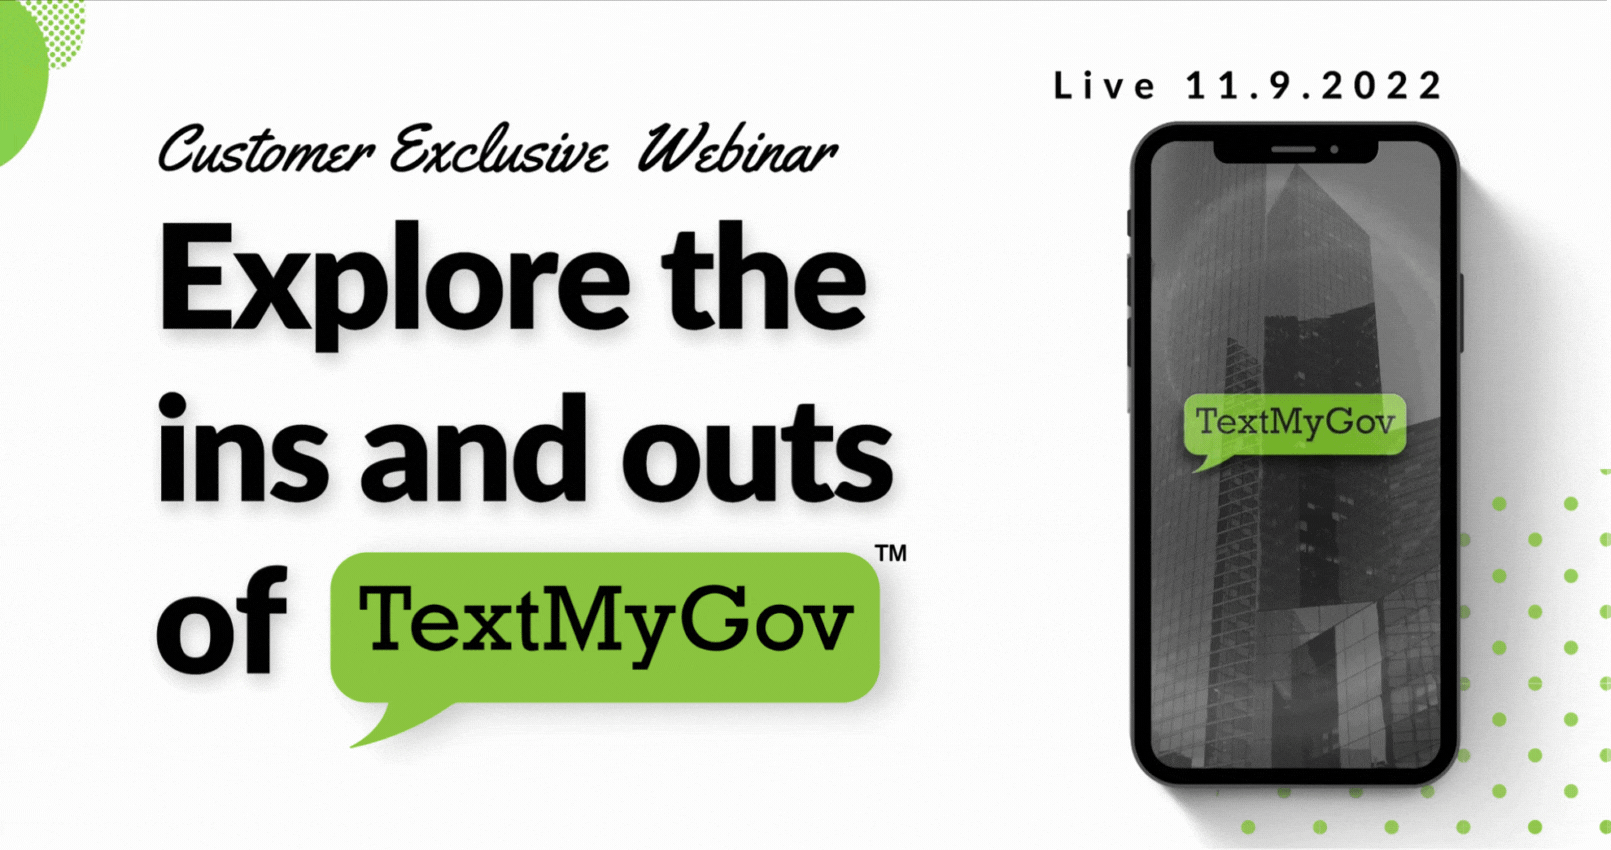 Explore the ins and outs of TextMyGov